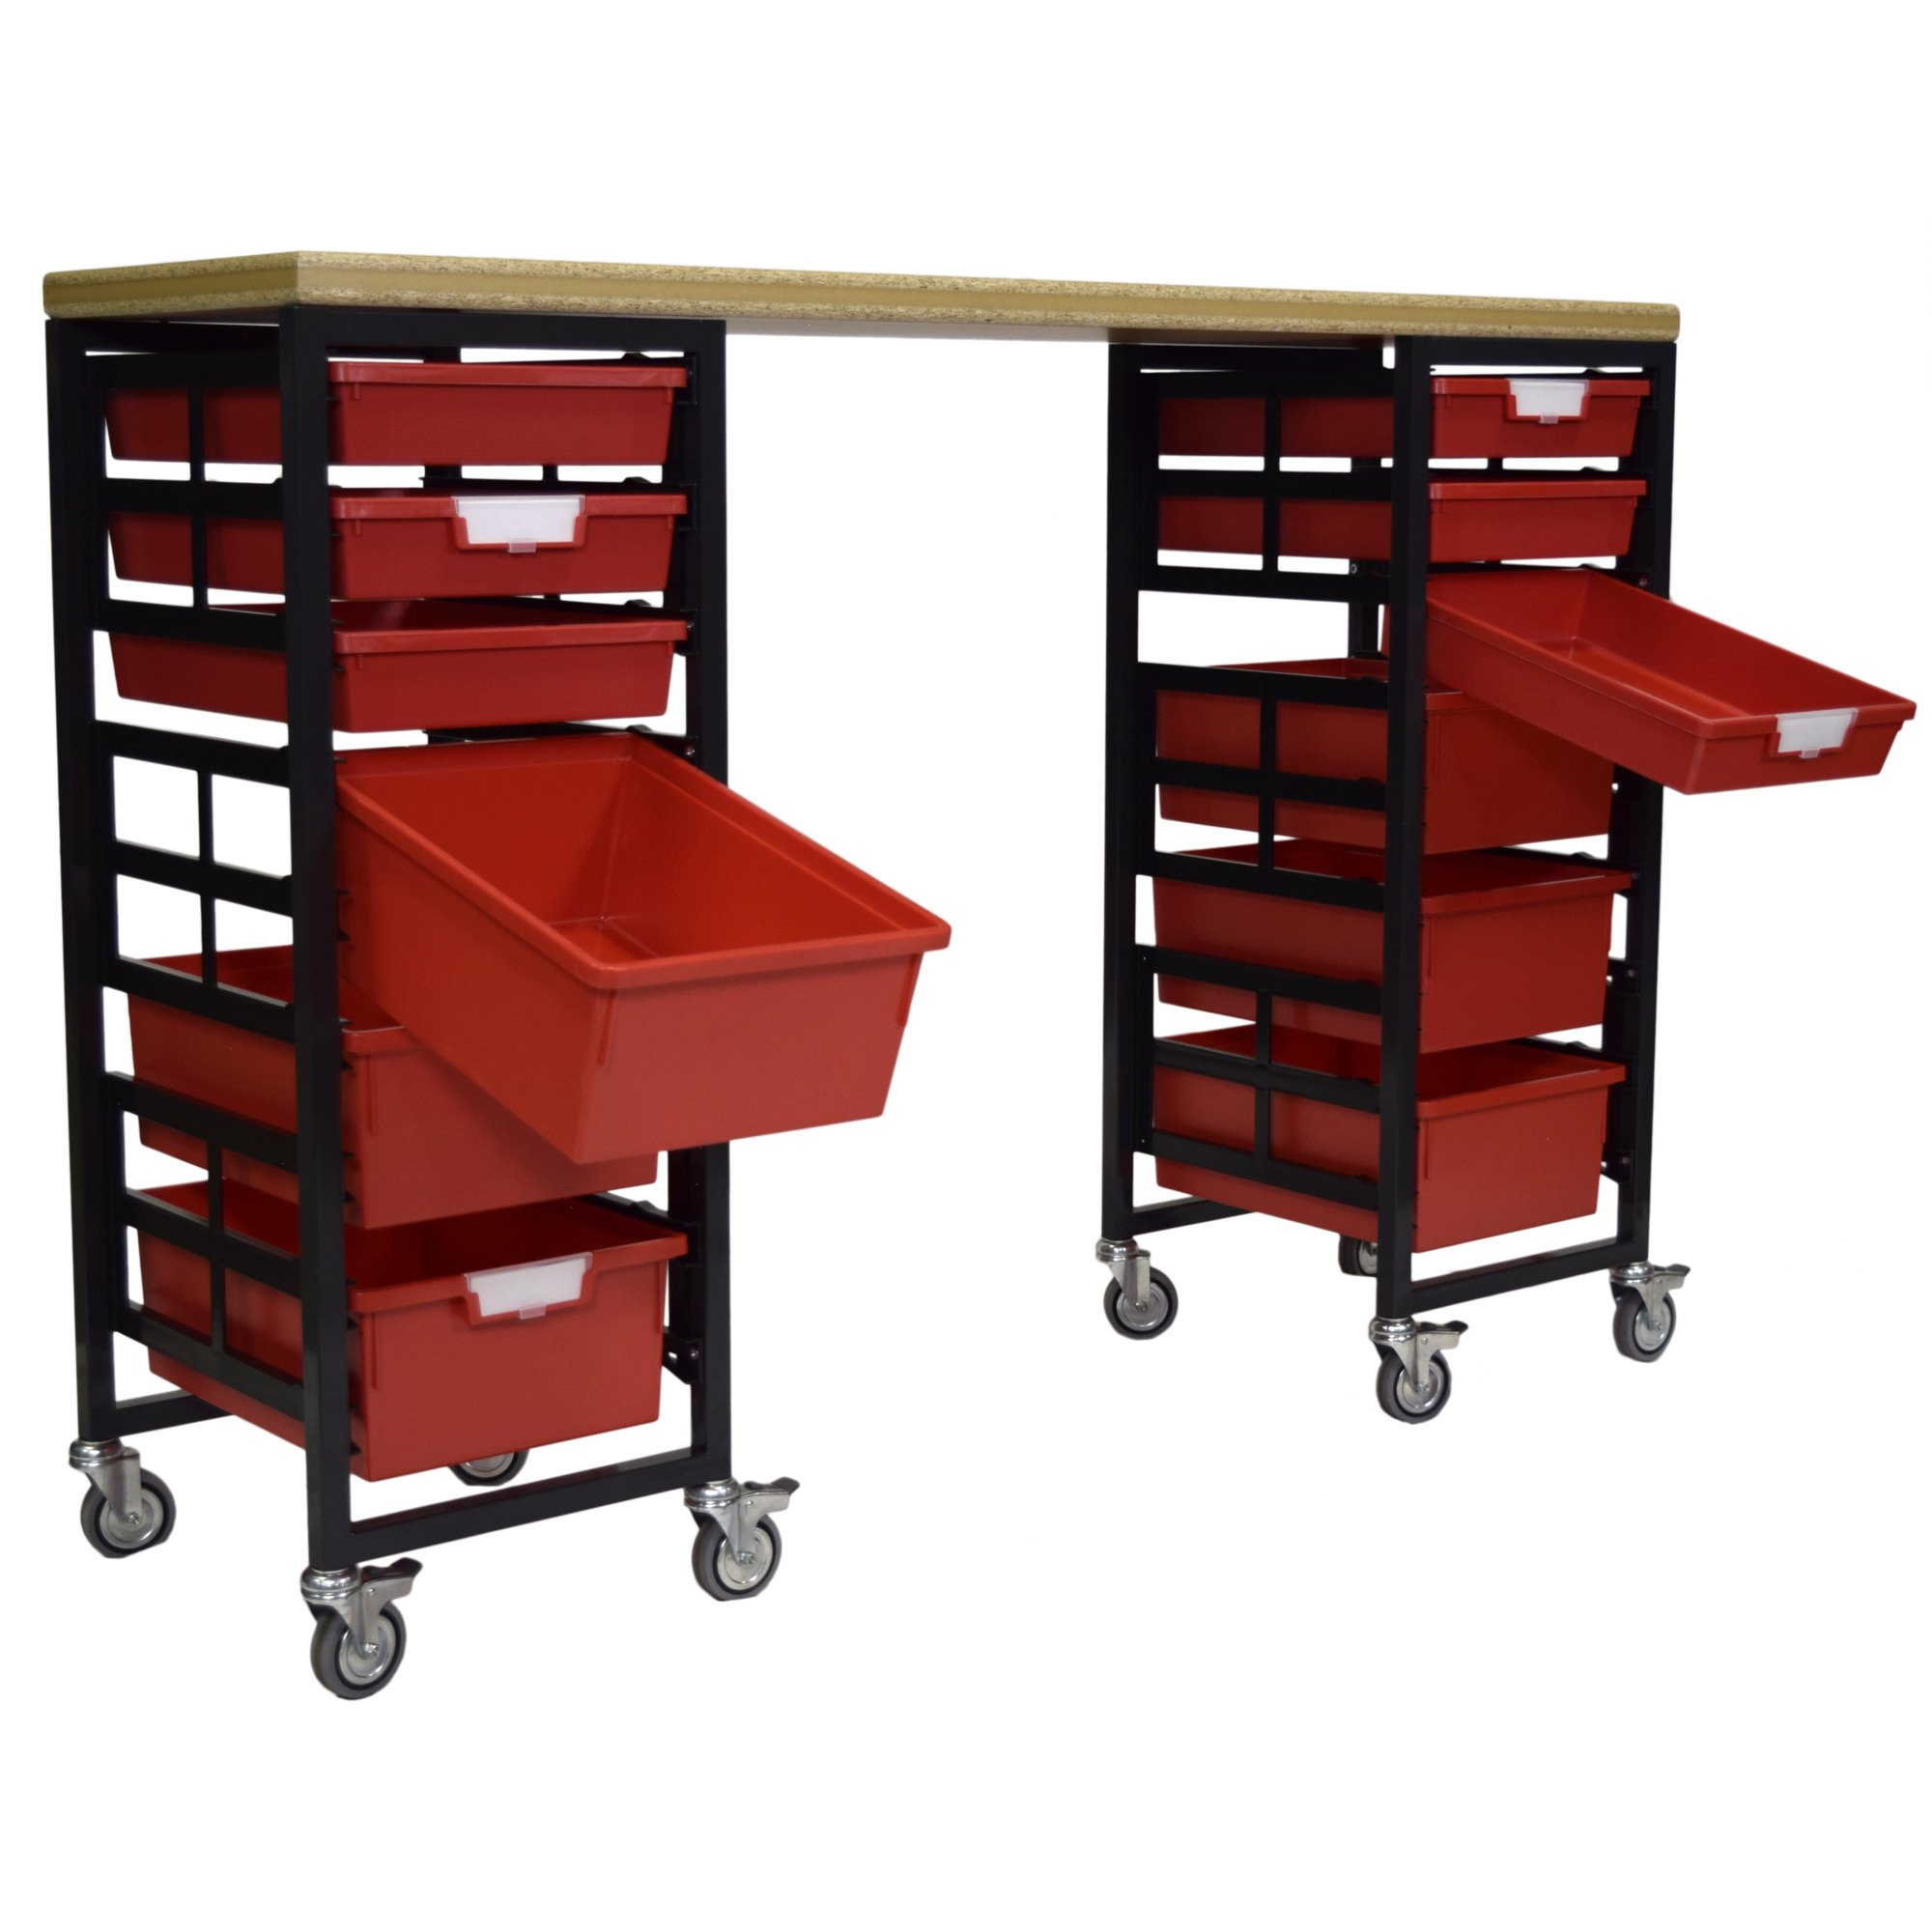 Certwood StorWerks, Mobile Workbench Station w/Wood Top -12 Trays-Red, Included (qty.) 12, Material Plastic, Height 3 in, Model CE2097DGGC-WB6S6DPR